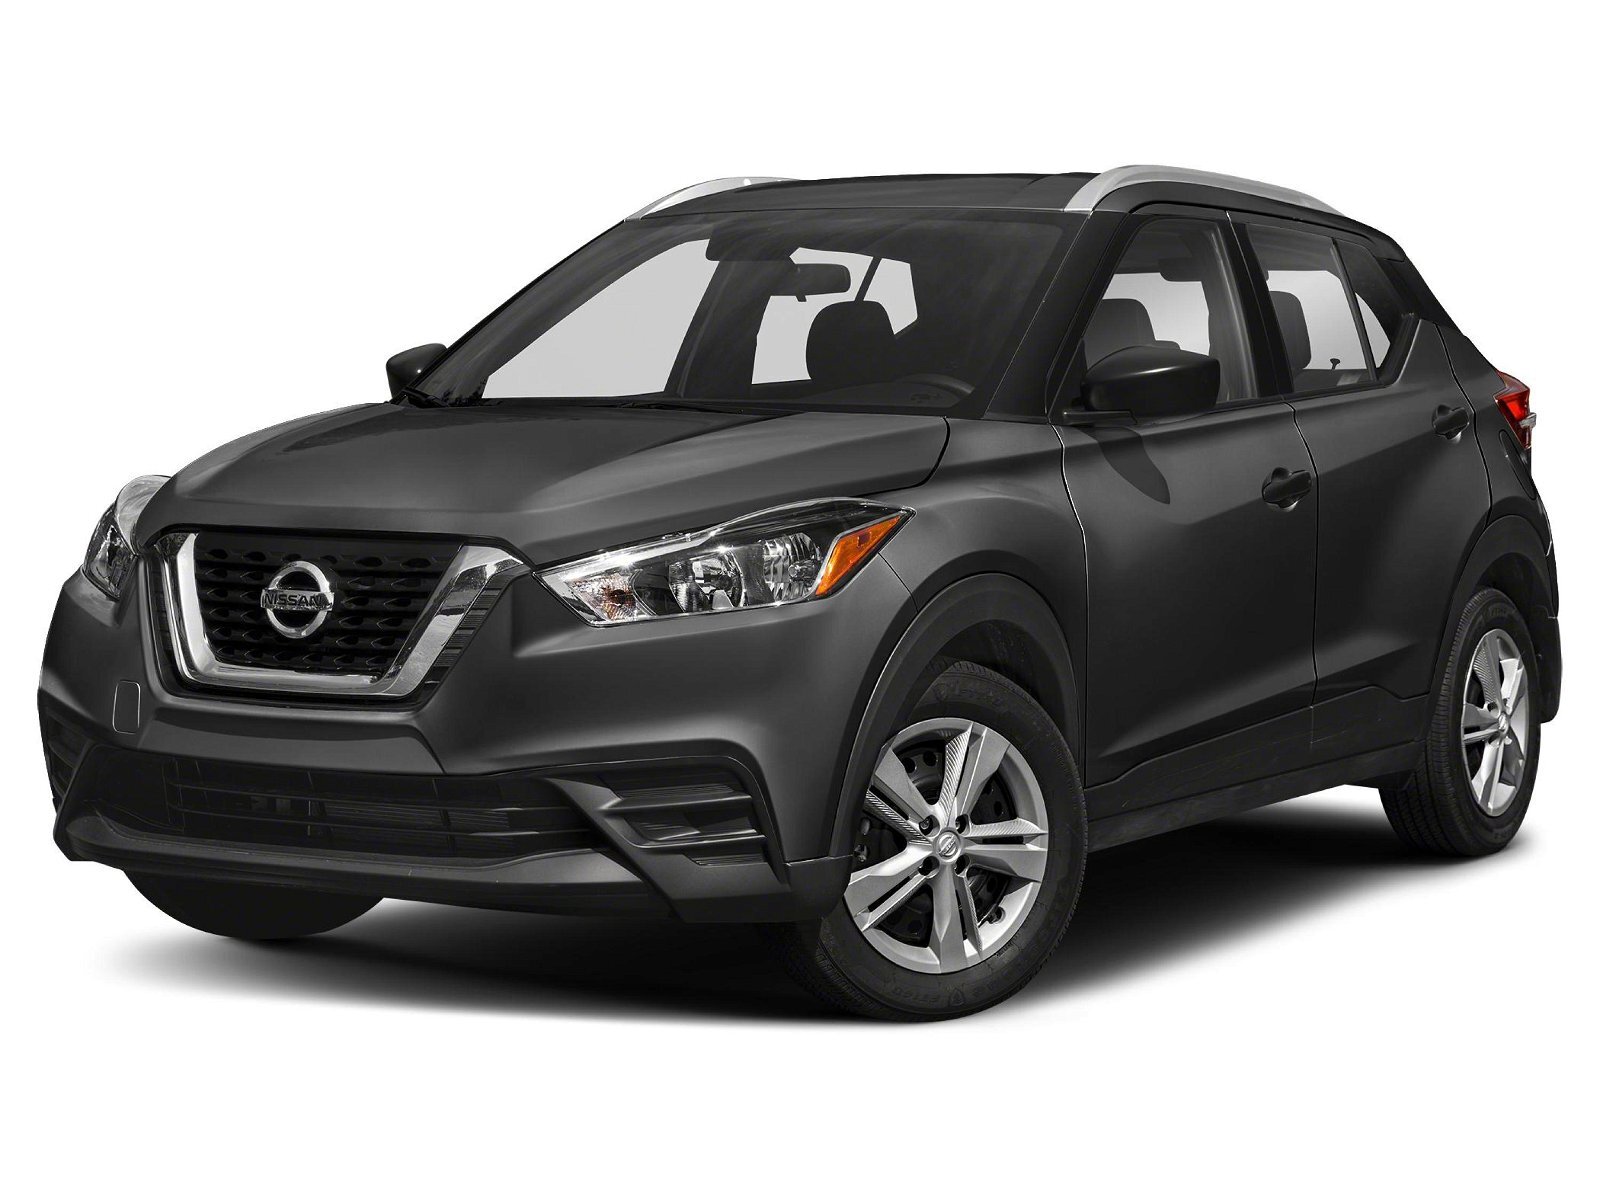 2020 Nissan Kicks SV Accident Free | Locally Owned | Low KM's